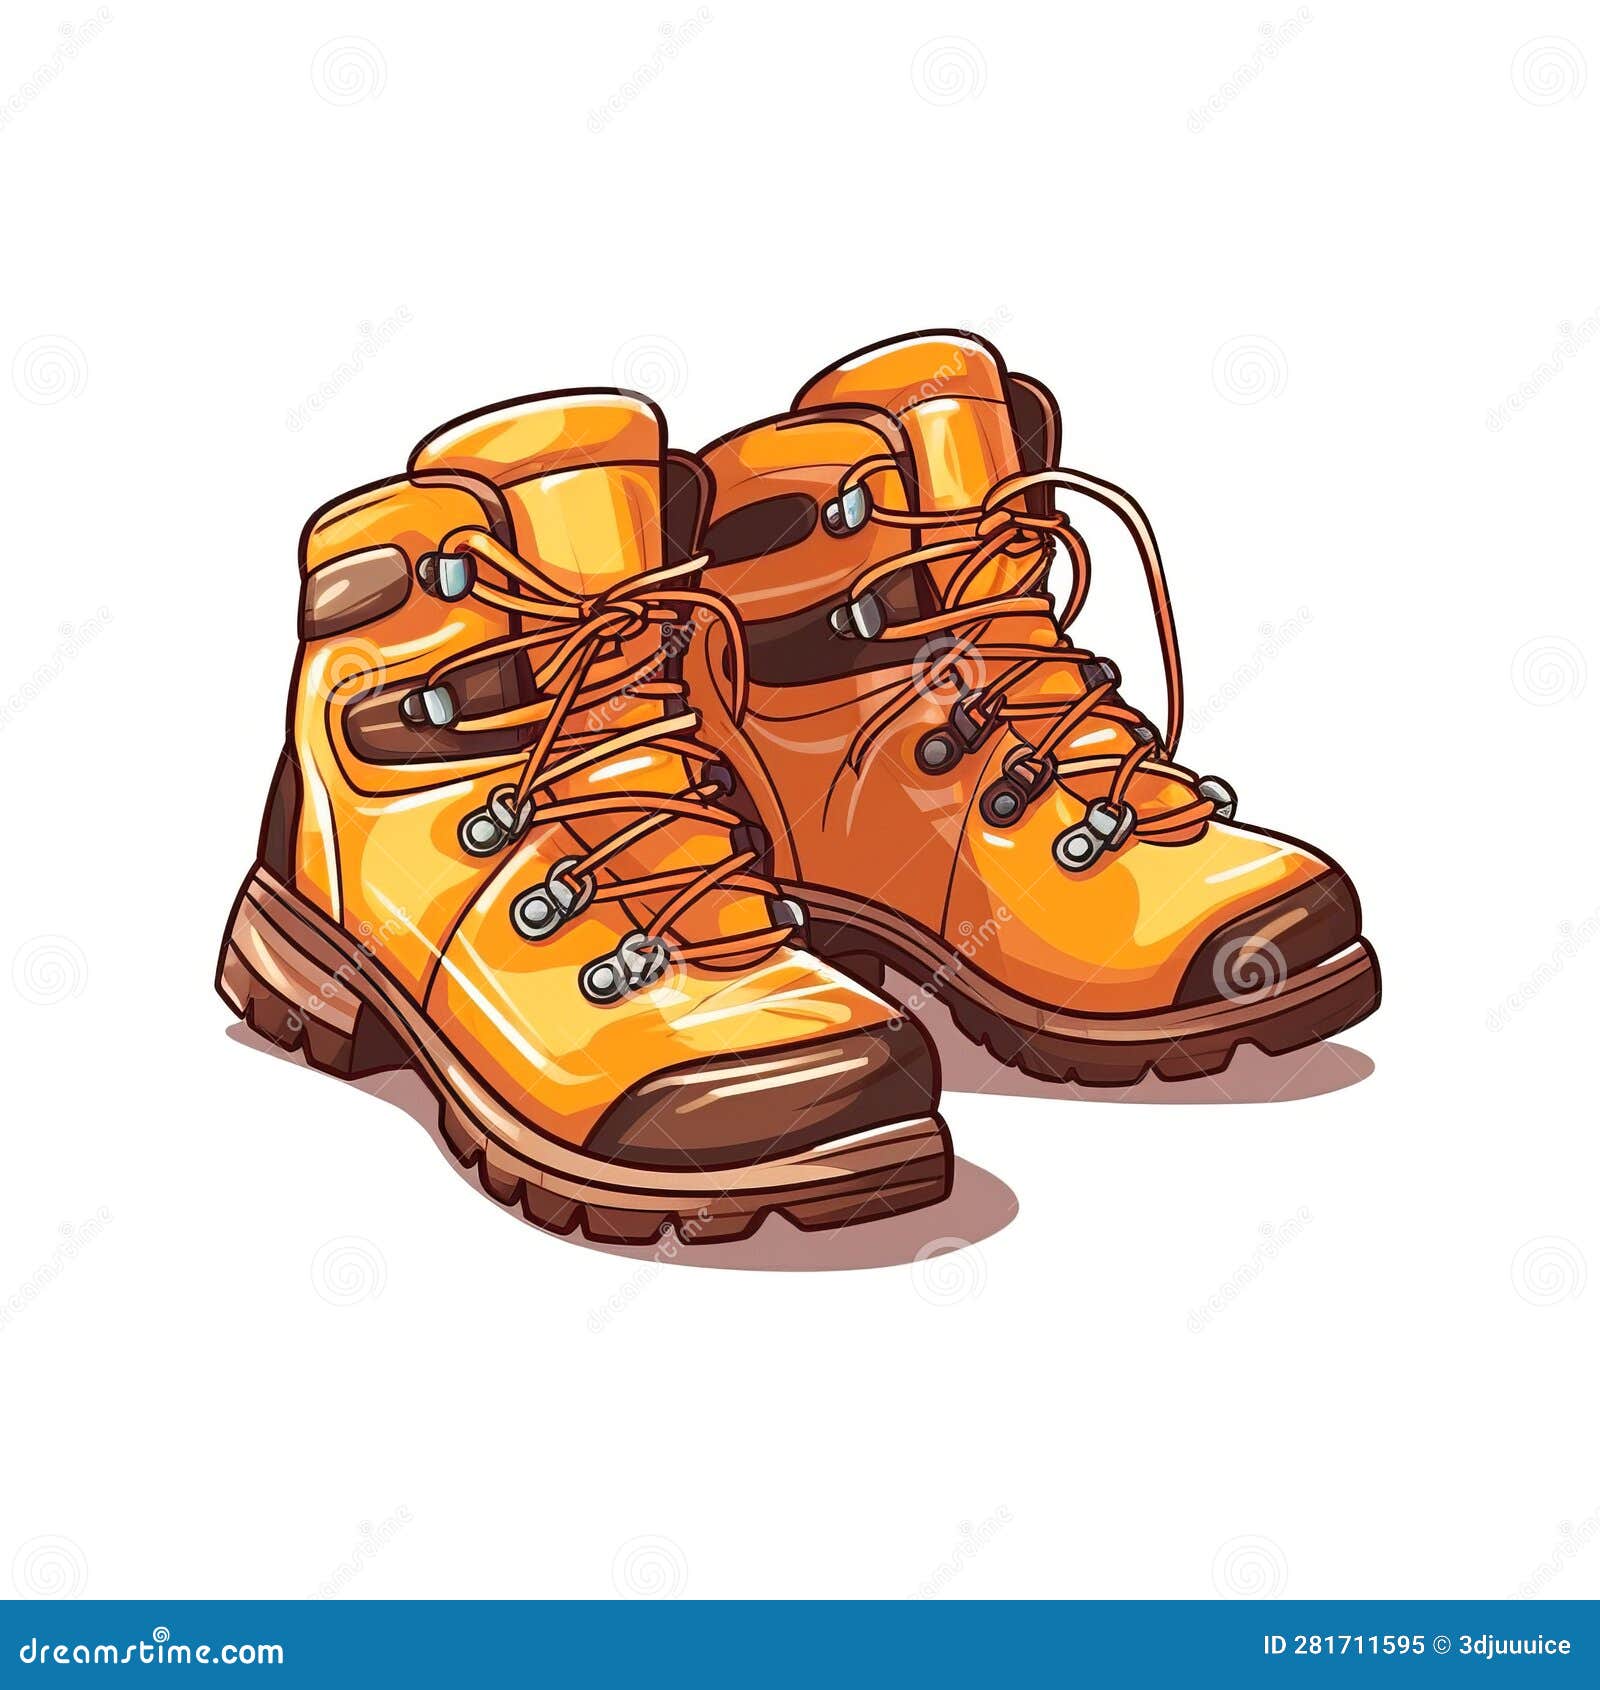 Travel Hiking Boots Outdoor Gear Cartoon Square Illustration. Stock ...